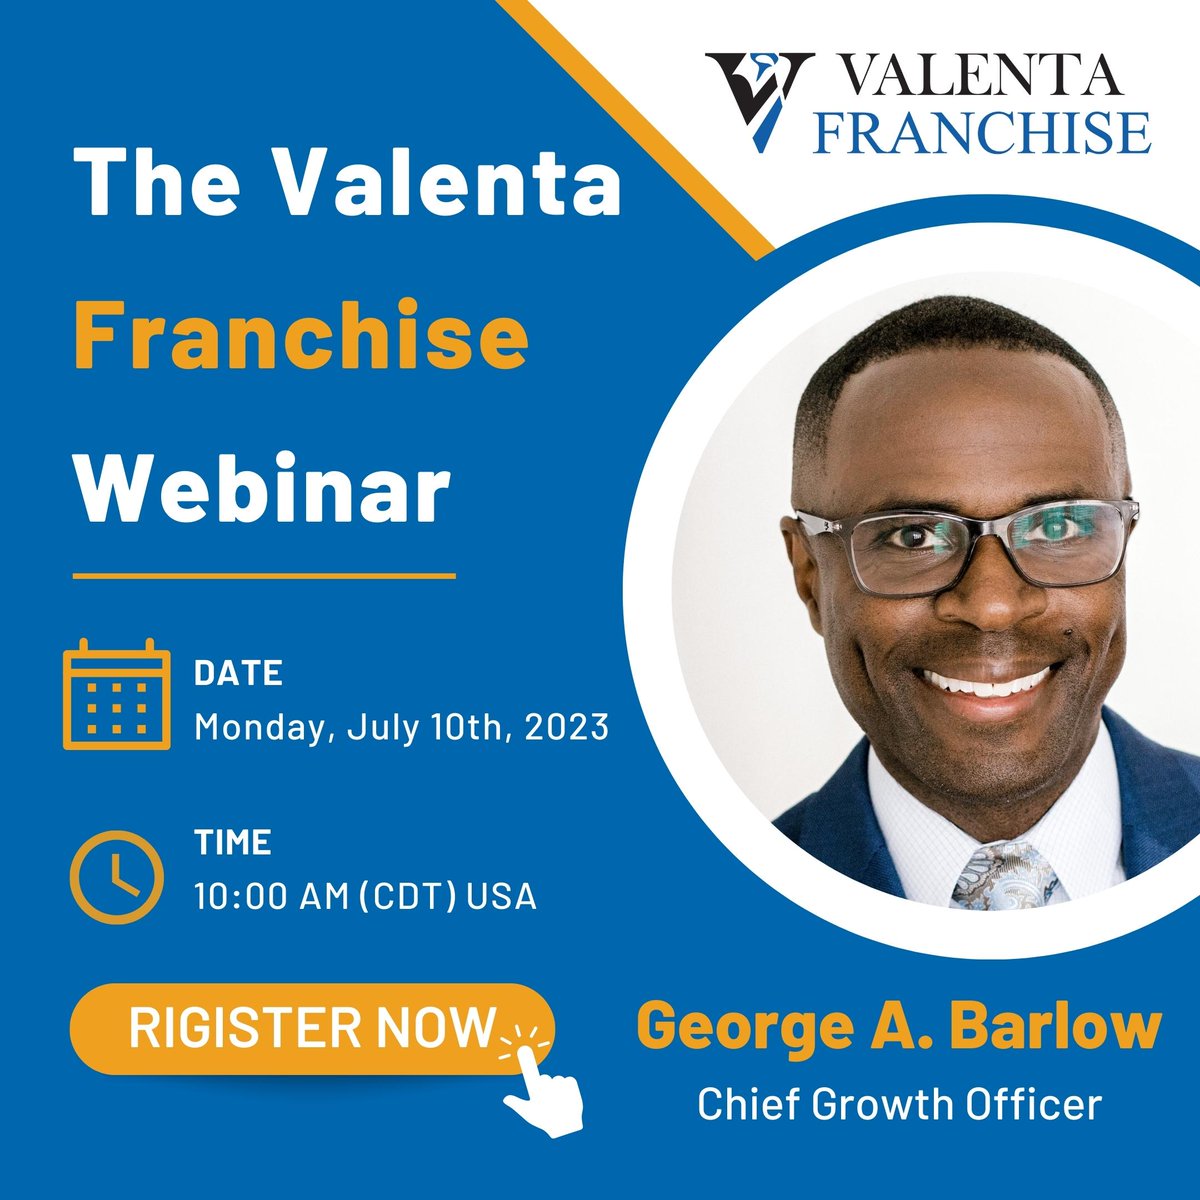 Calling all #FranchiseBrokers! Join our webinar series, 'The Valenta #FranchiseOpportunity,' featuring George Barlow, our Chief Growth Officer; on July 10th and learn the benefits of becoming a #Valentafranchisee.

🌐 Register here: zurl.co/okQS
#BusinessOpportunity